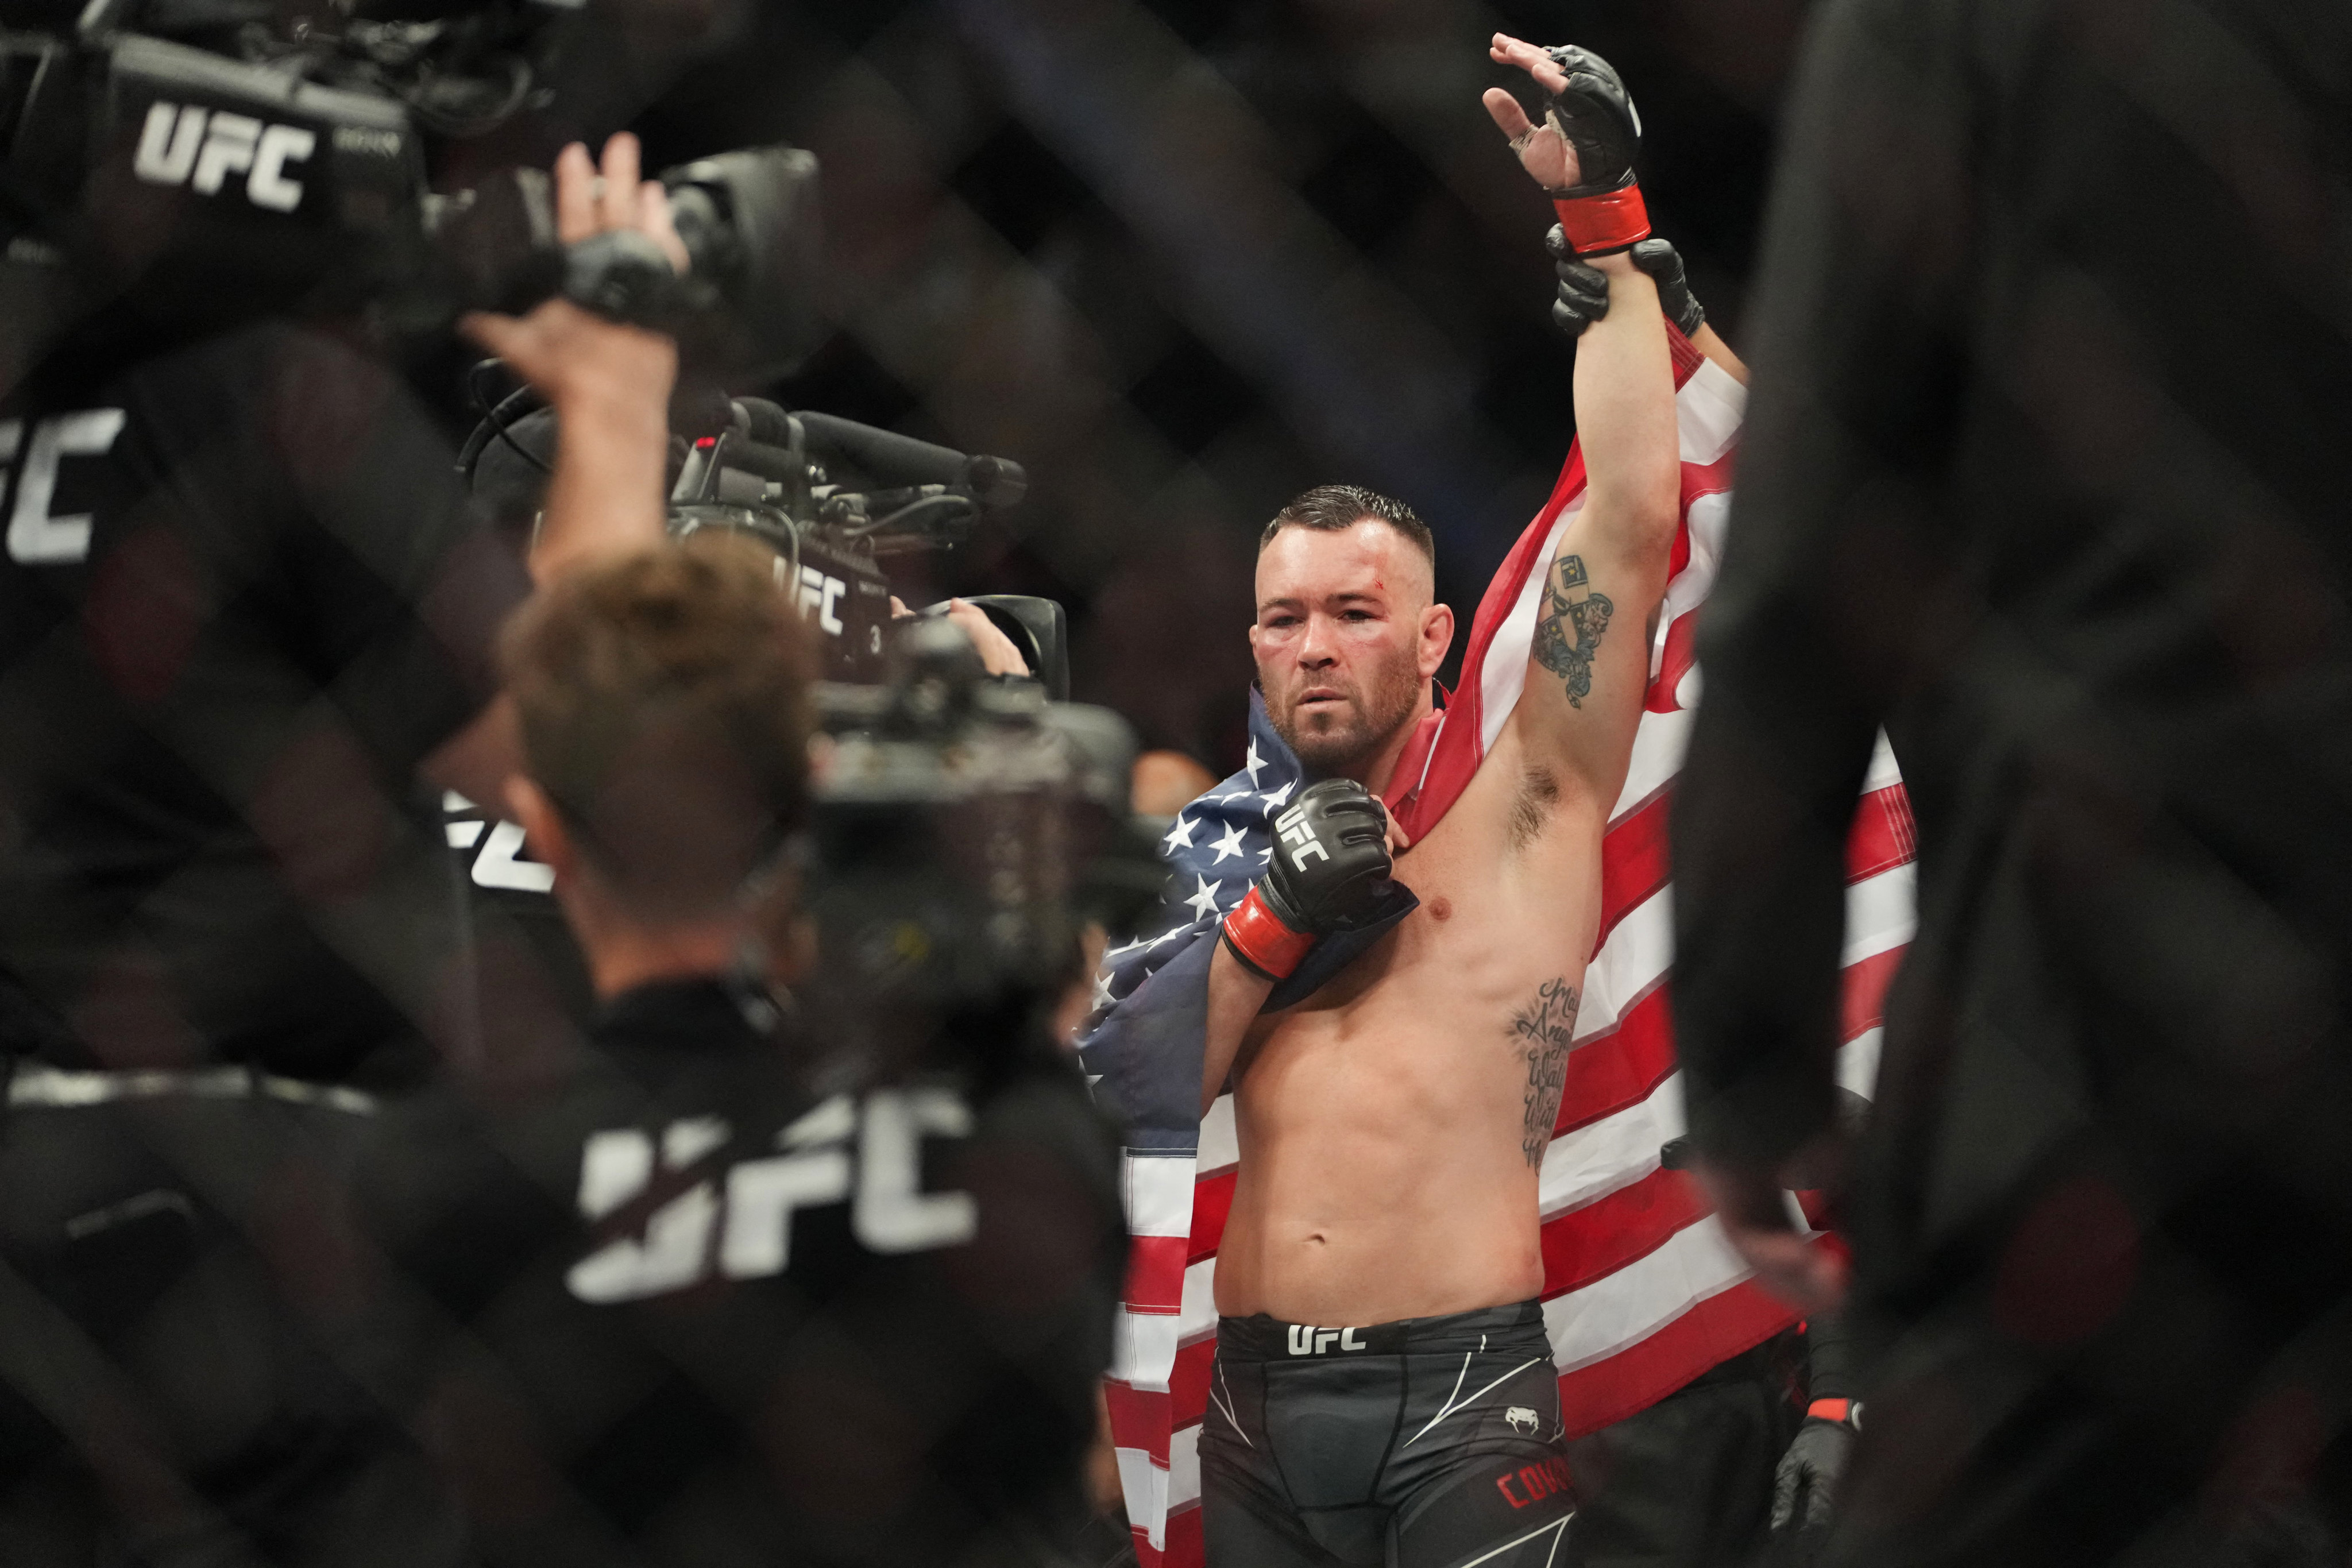 Colby Covington a unanimous decision victory over Jorge Masvidal at UFC 272 in Las Vegas. Photo: Stephen R. Sylvanie-USA TODAY Sports